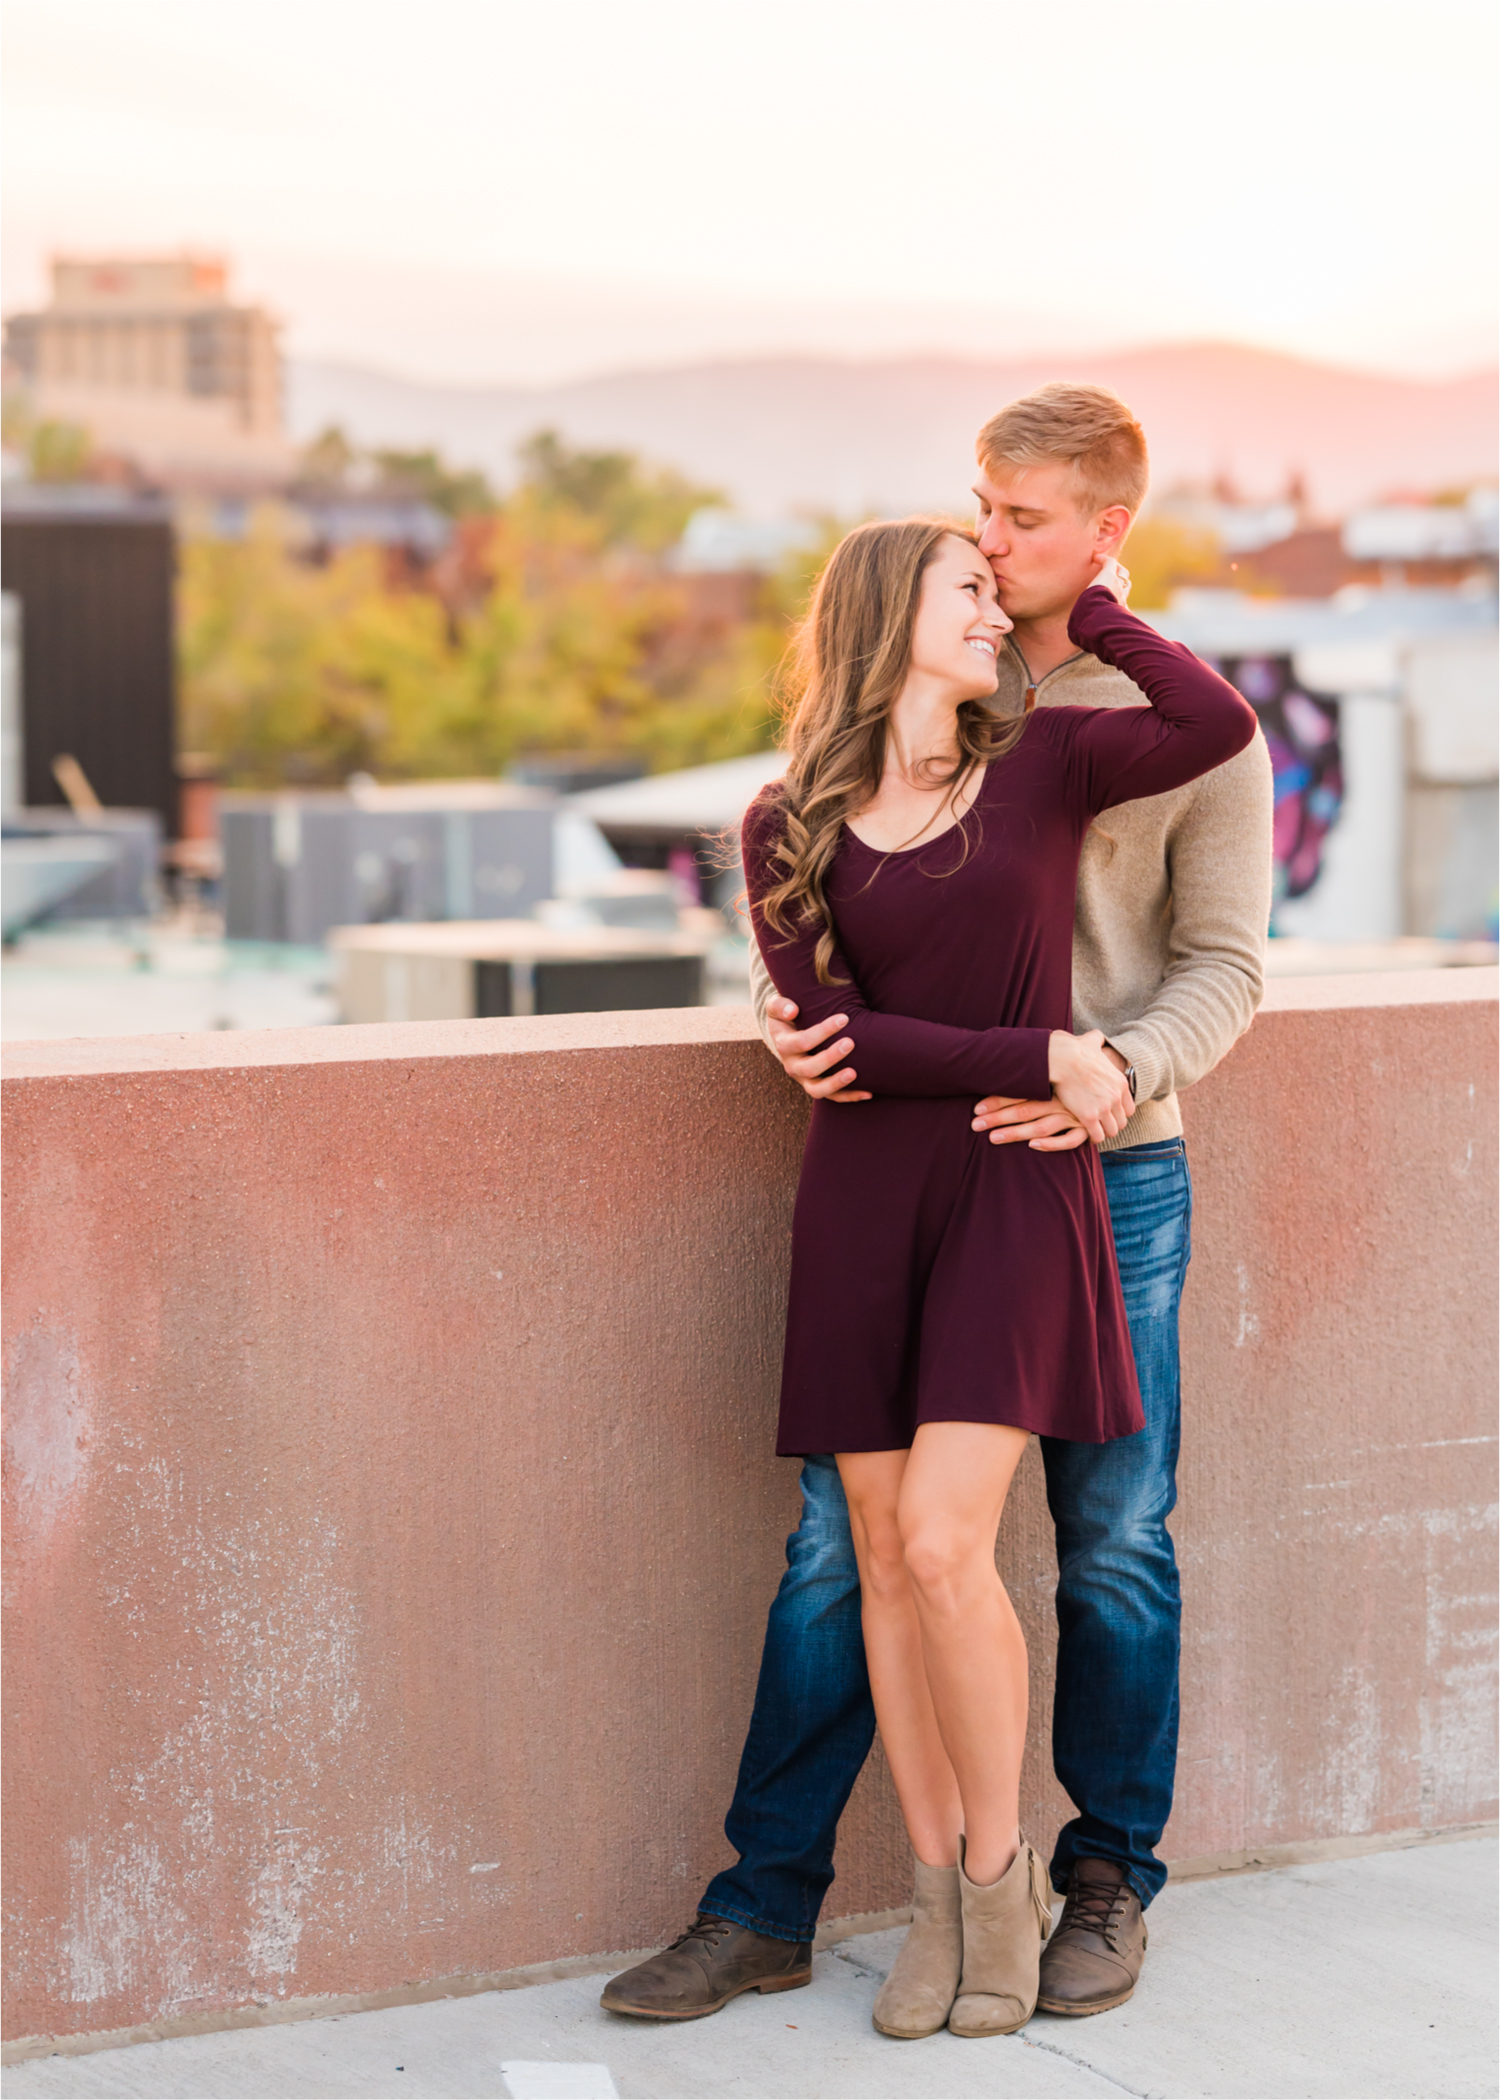 Fall Engagement in Old Town Fort Collins | Britni Girard Photography | Colorado Wedding Photography and Videography | Husband and Wife Team | Rooftop Sunset Engagement | with Rocky Mountains